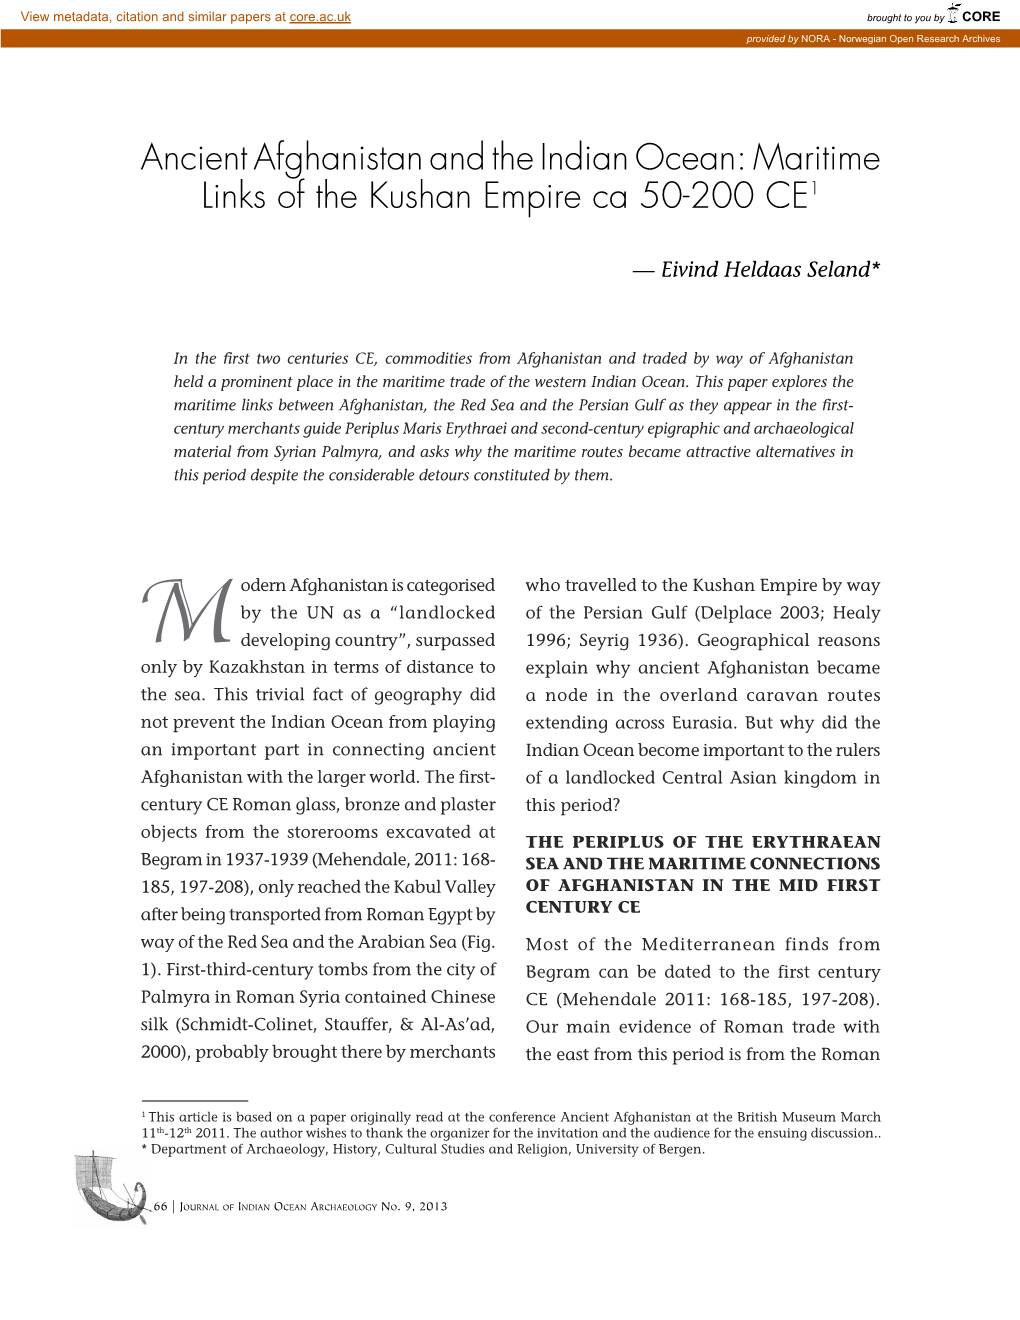 Ancient Afghanistan and the Indian Ocean: Maritime Links of the Kushan Empire Ca 50-200 CE1